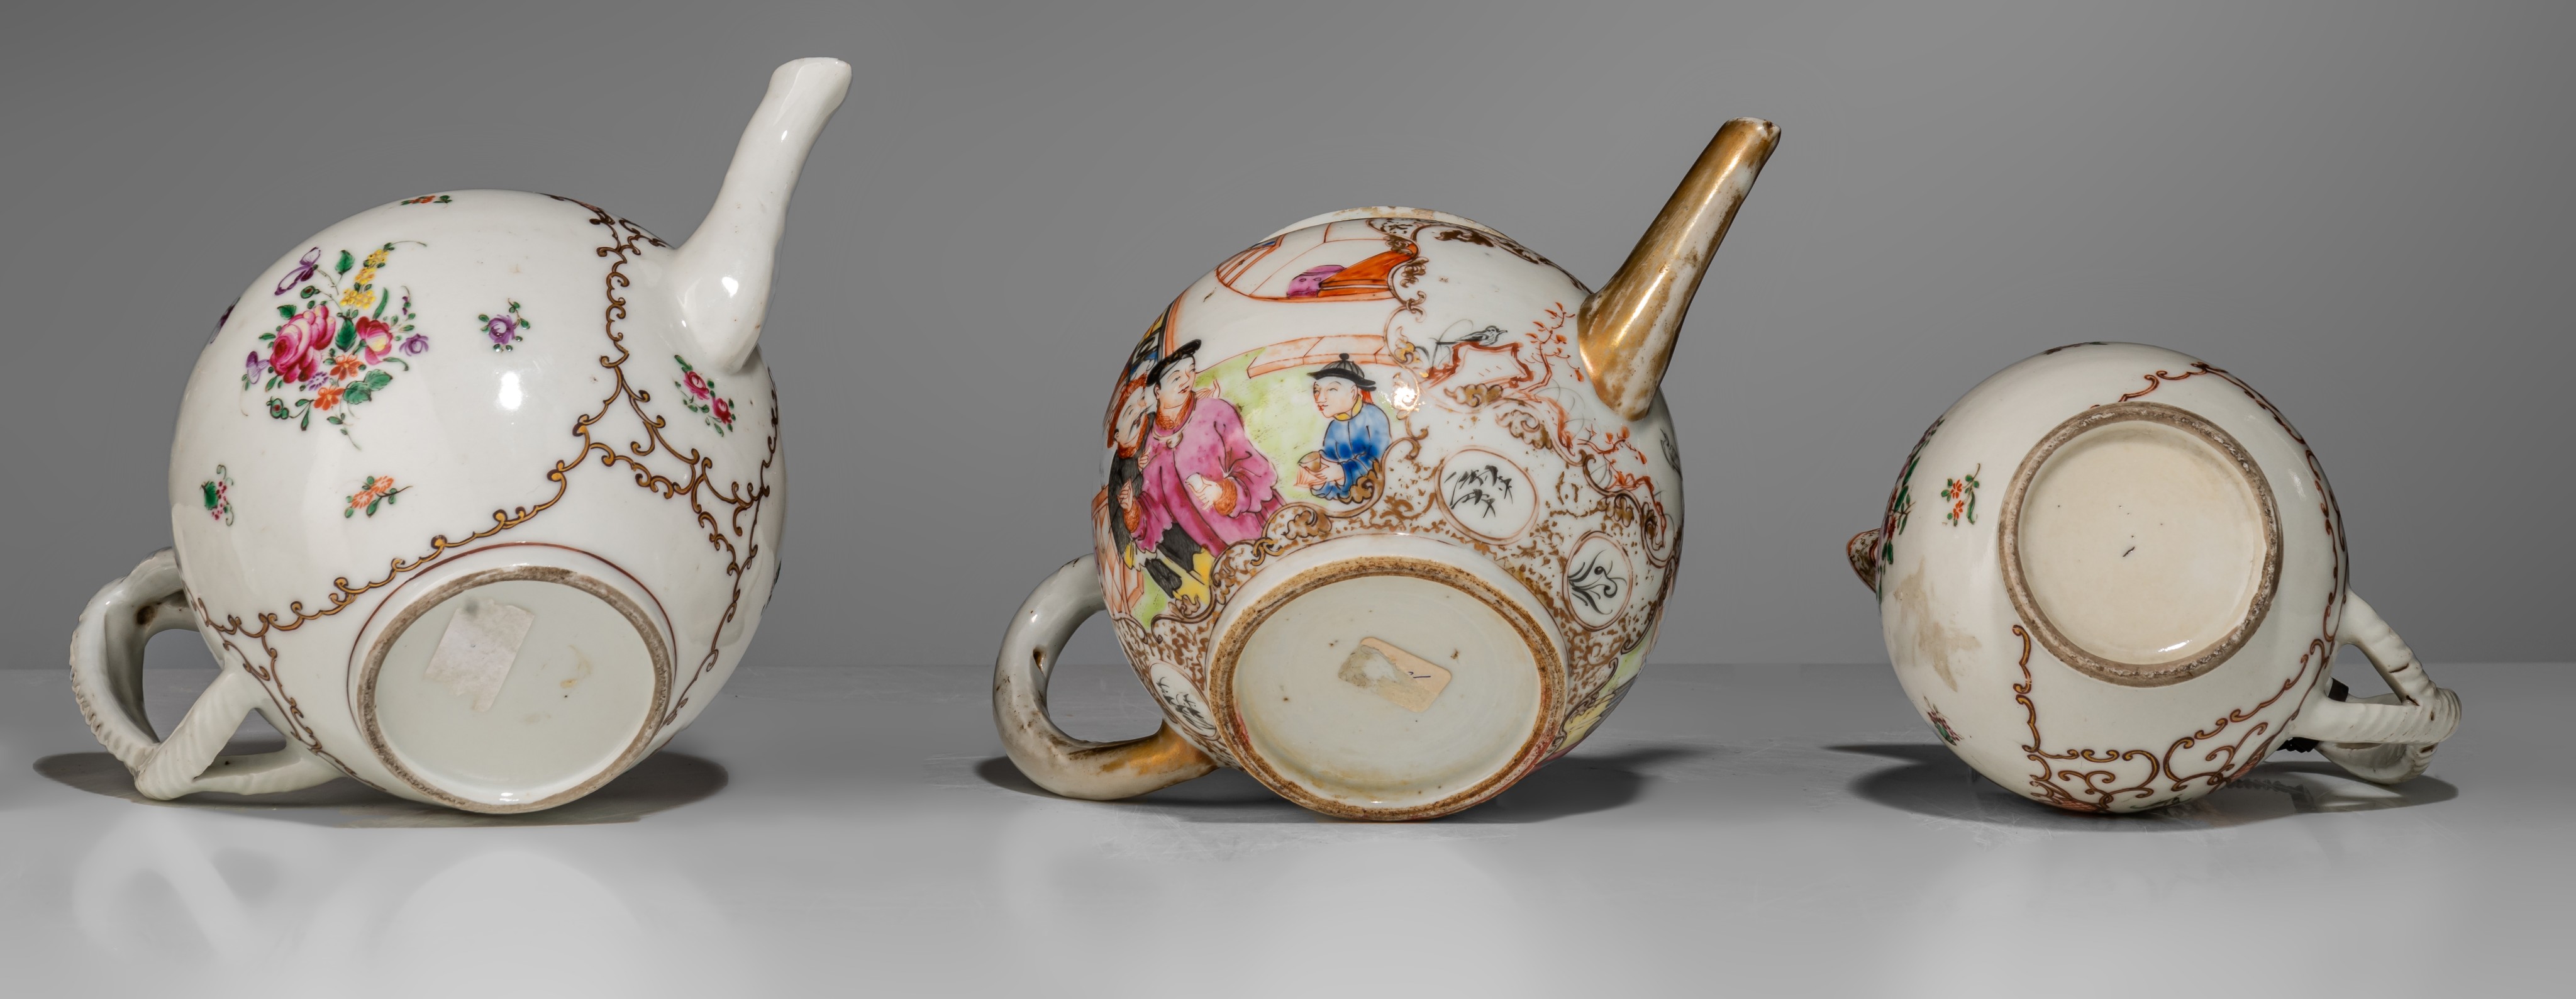 A collection of famille rose and gilt decorated export porcelain ware, 18thC, largest - H 12,5 - 34, - Image 7 of 20